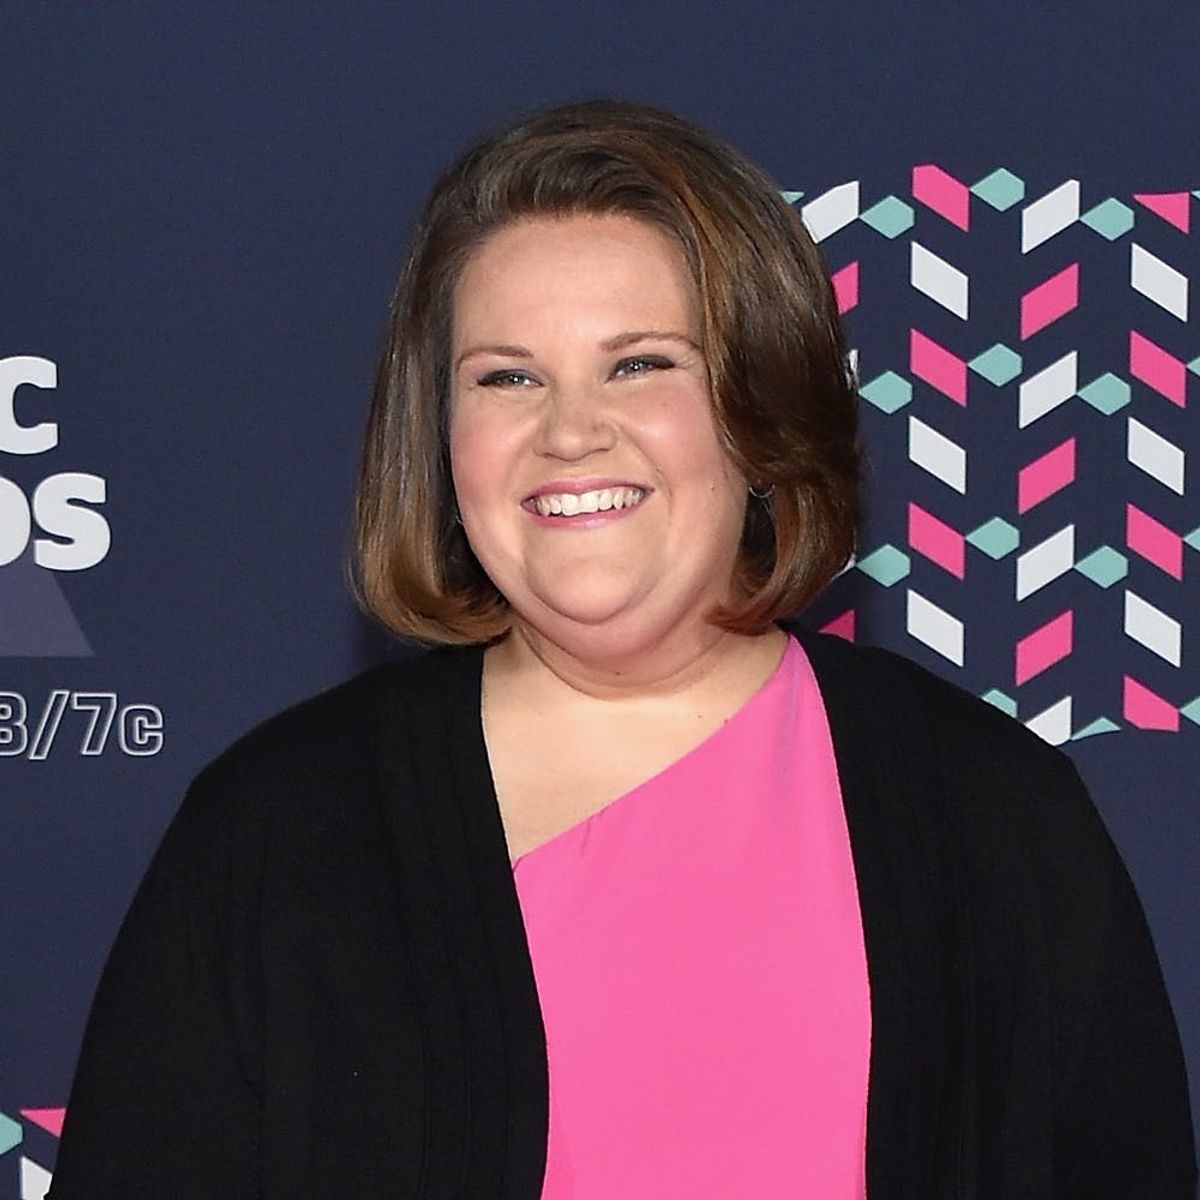 Chewbacca Mom Just Got Her Own Action Figure